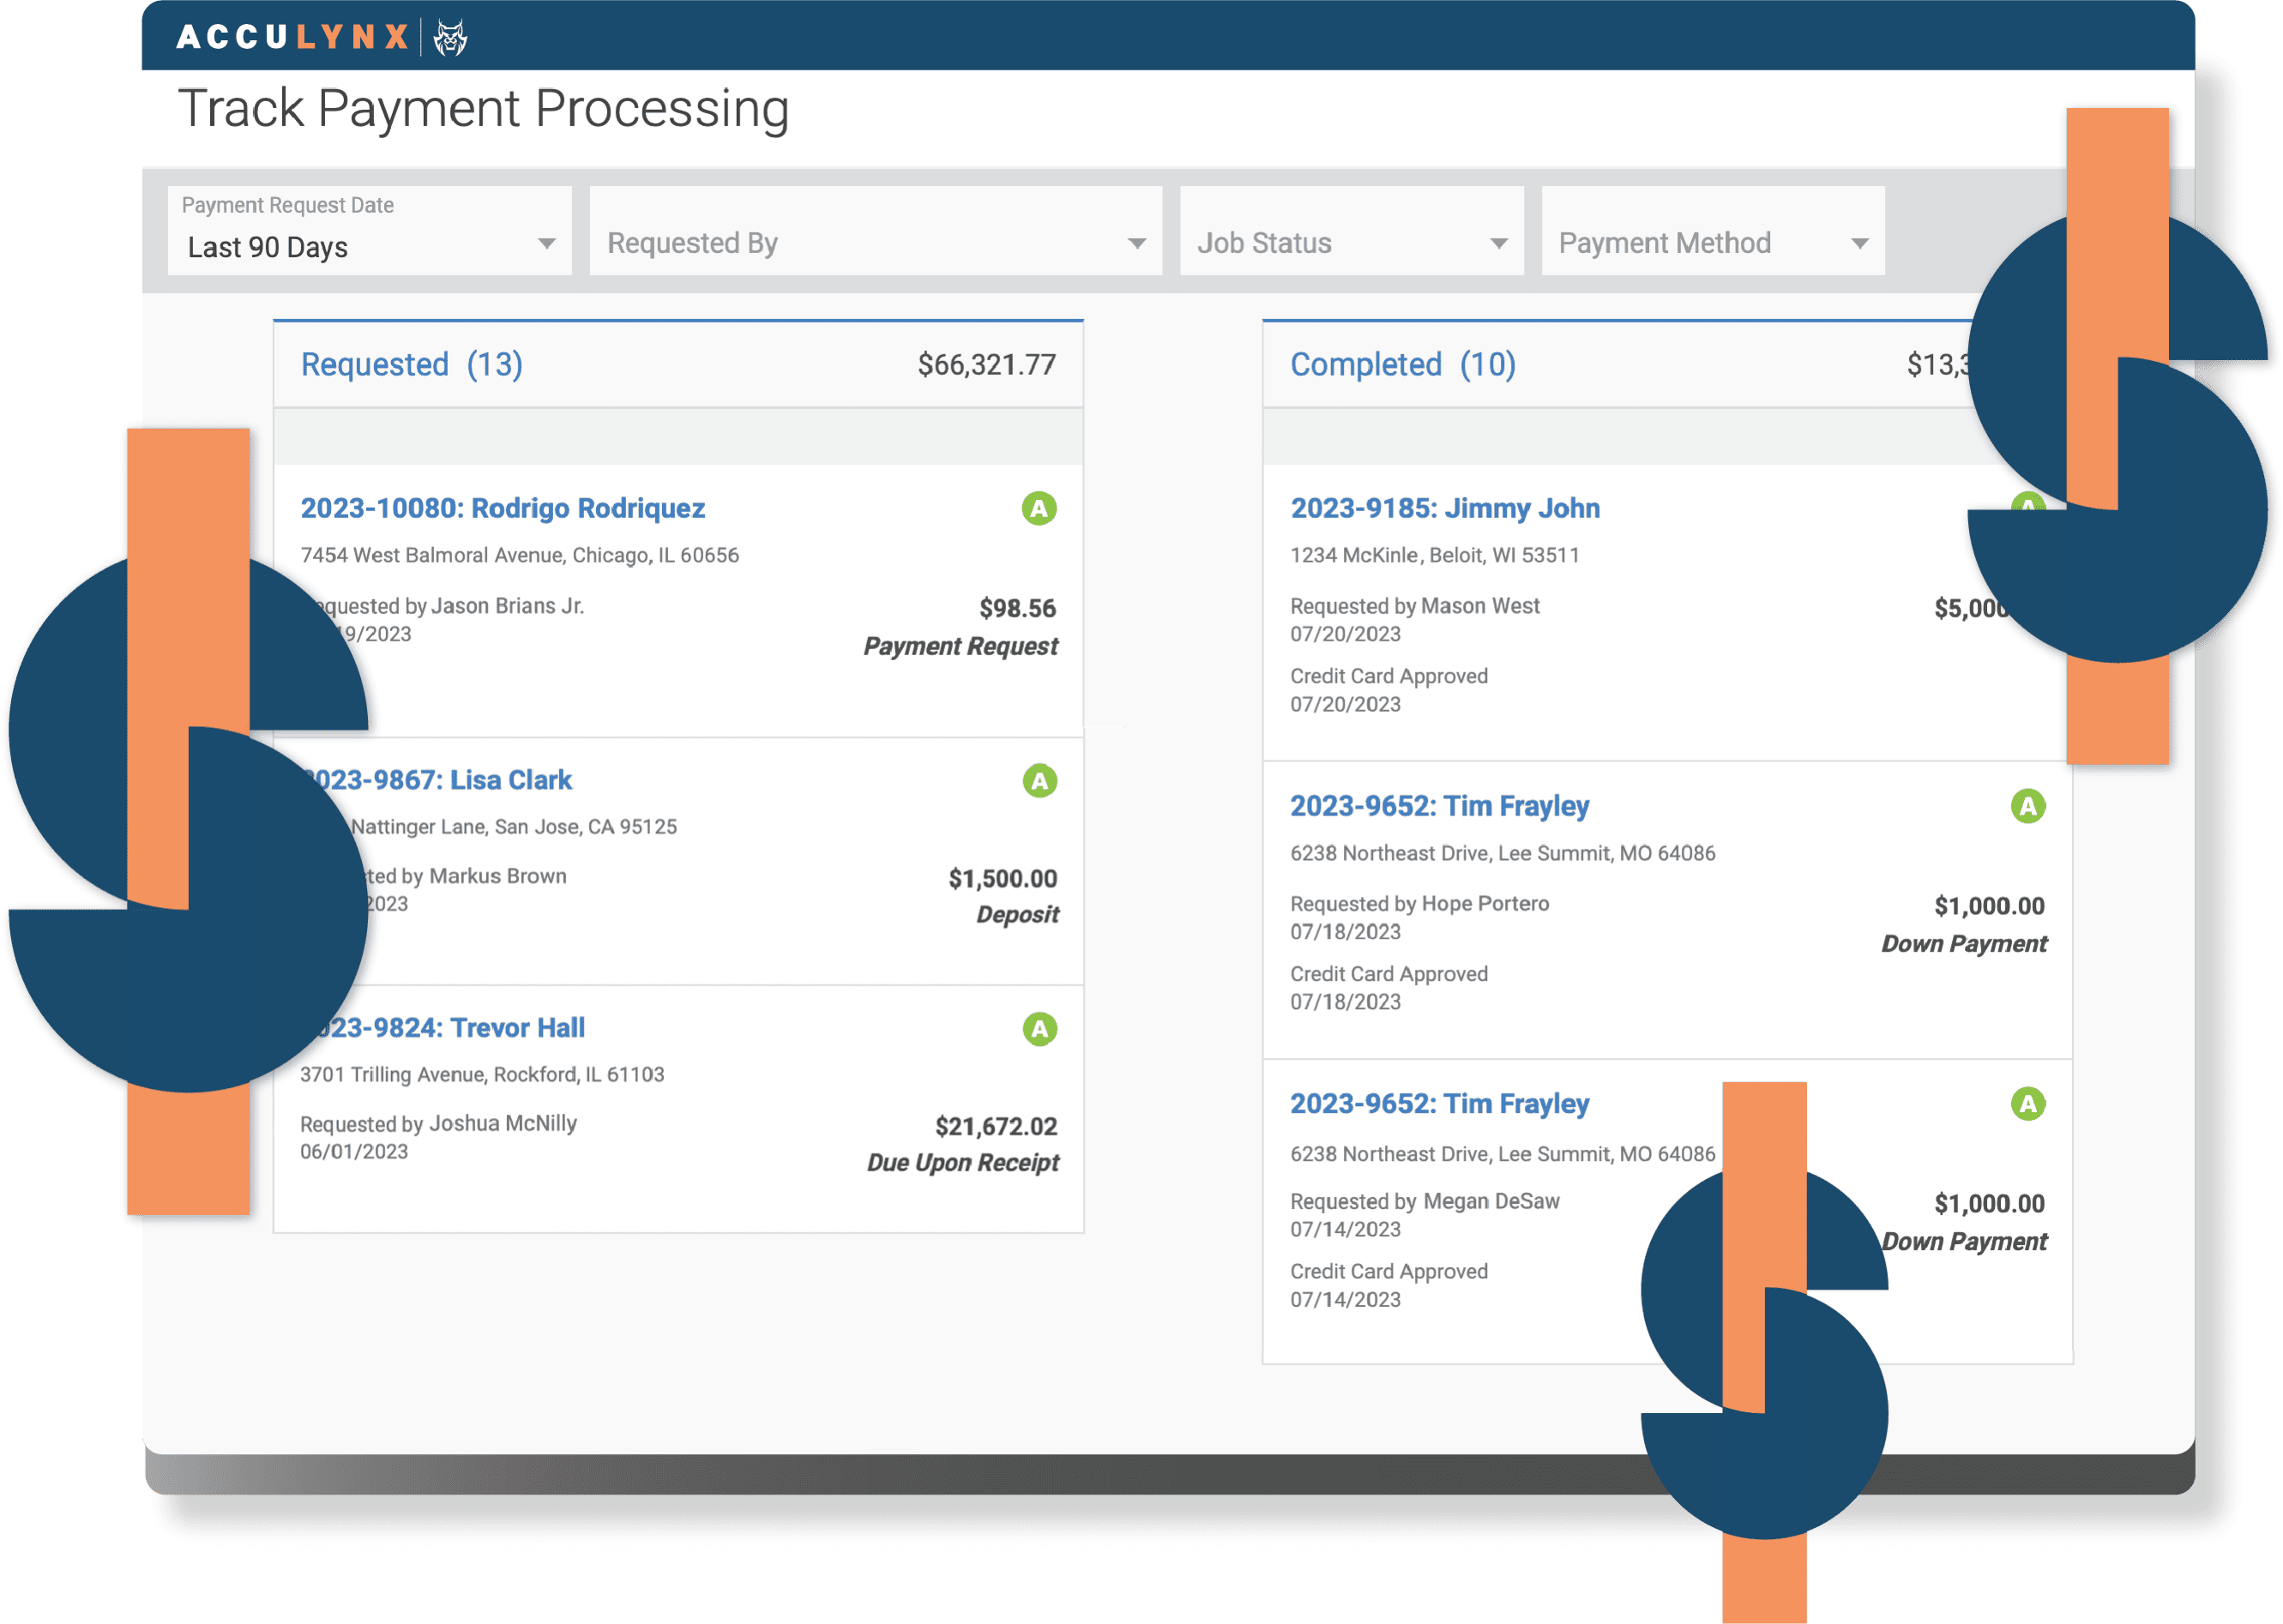 Screenshot of the AccuLynx payment processing tracking tool